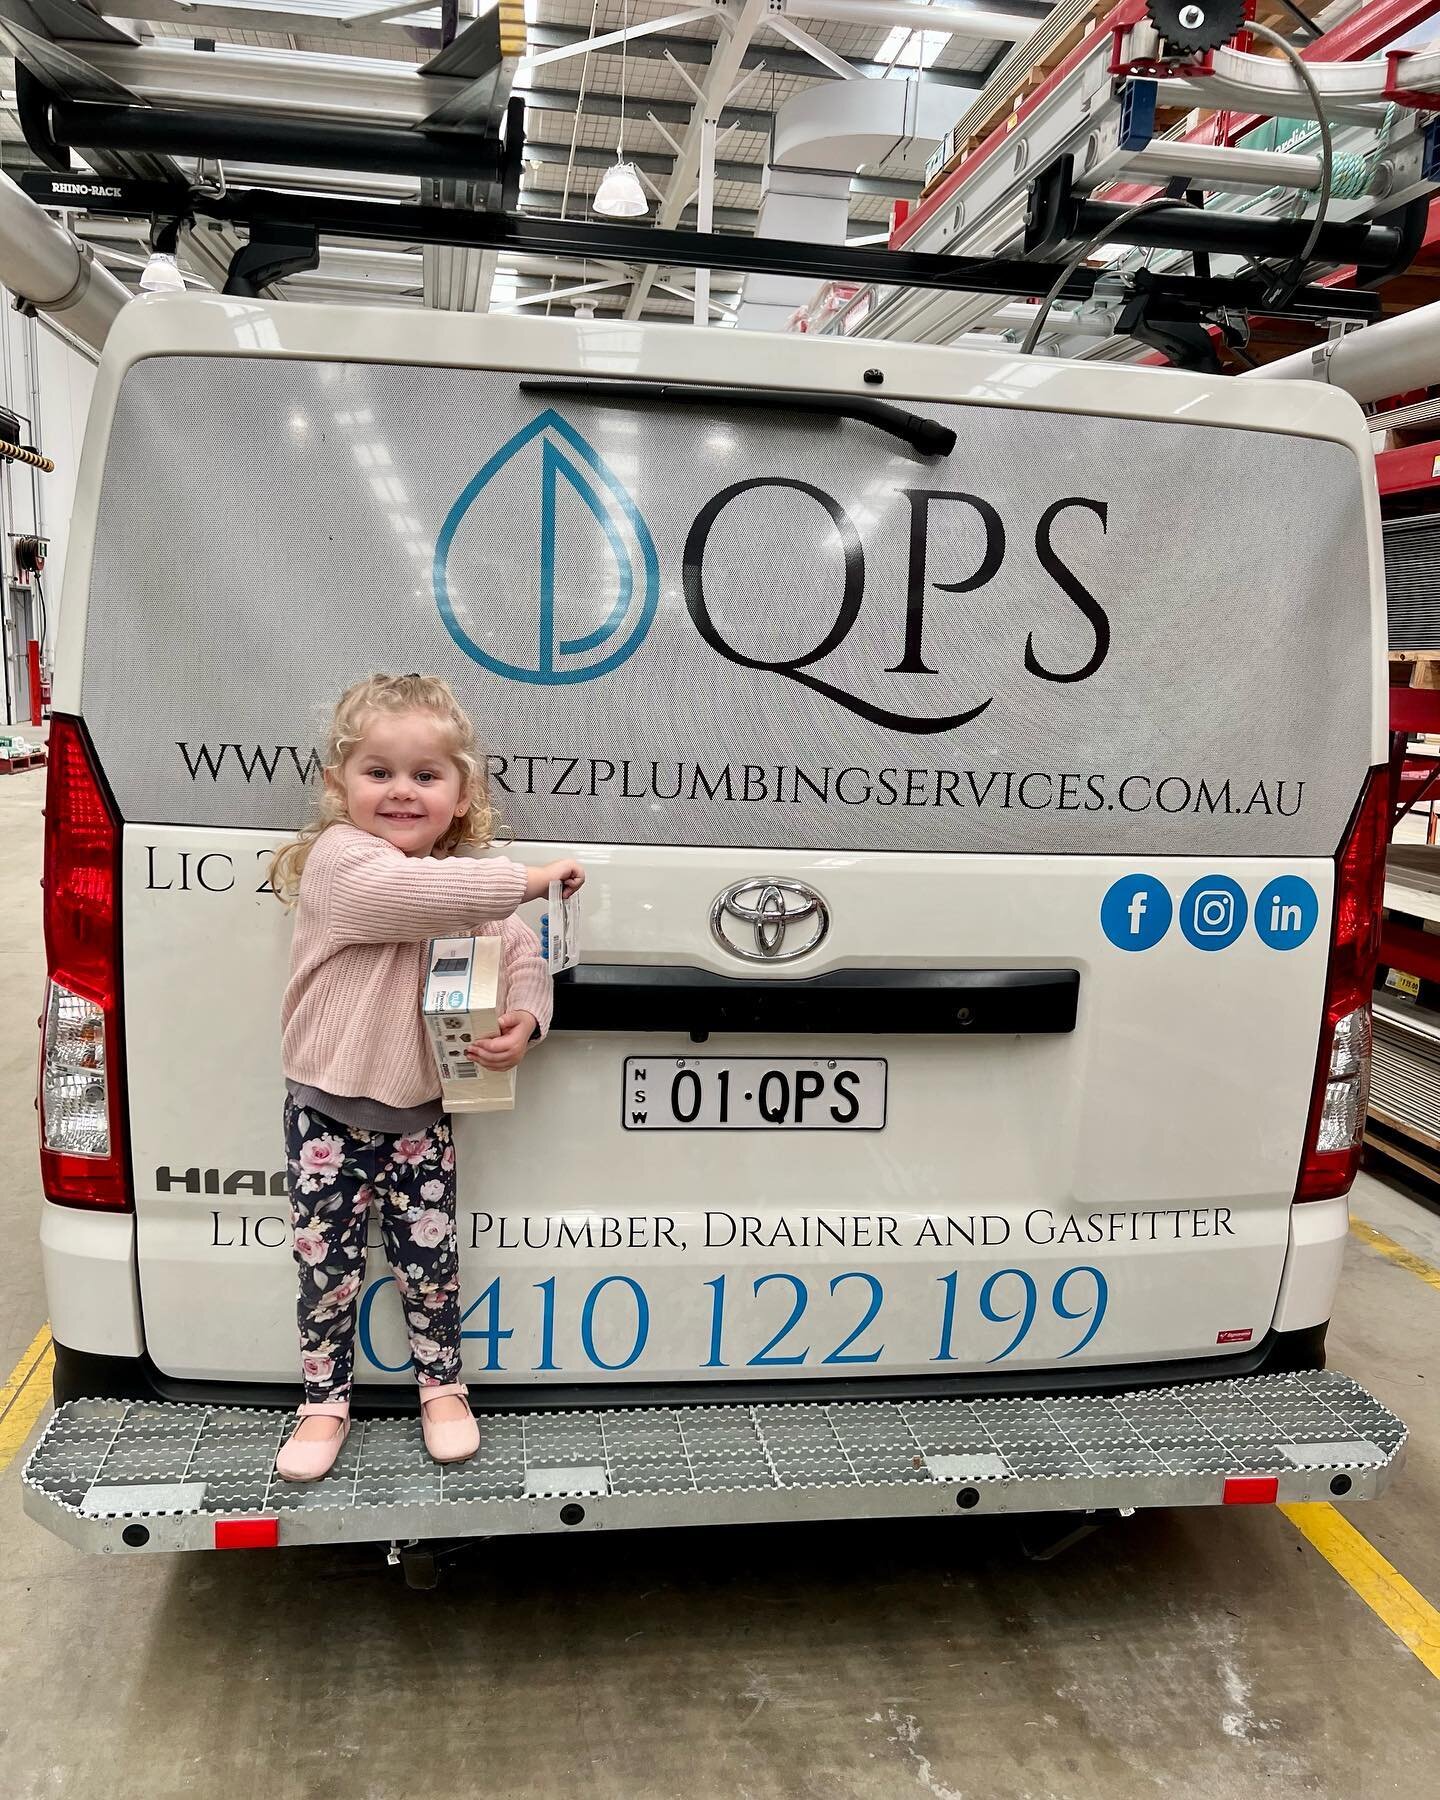 QPS - Don&rsquo;t Risk it | Use My Daddy! 👧🏼 
#Plumbing | The Quartz Difference 💎 
.
.
.
#plumbproud #plumbinglife #plumbingproblems #mondaymotivation #happiness #vibes #goodvibes #positivevibes #qps #plumber #plumbers #instagood #instagood #insta